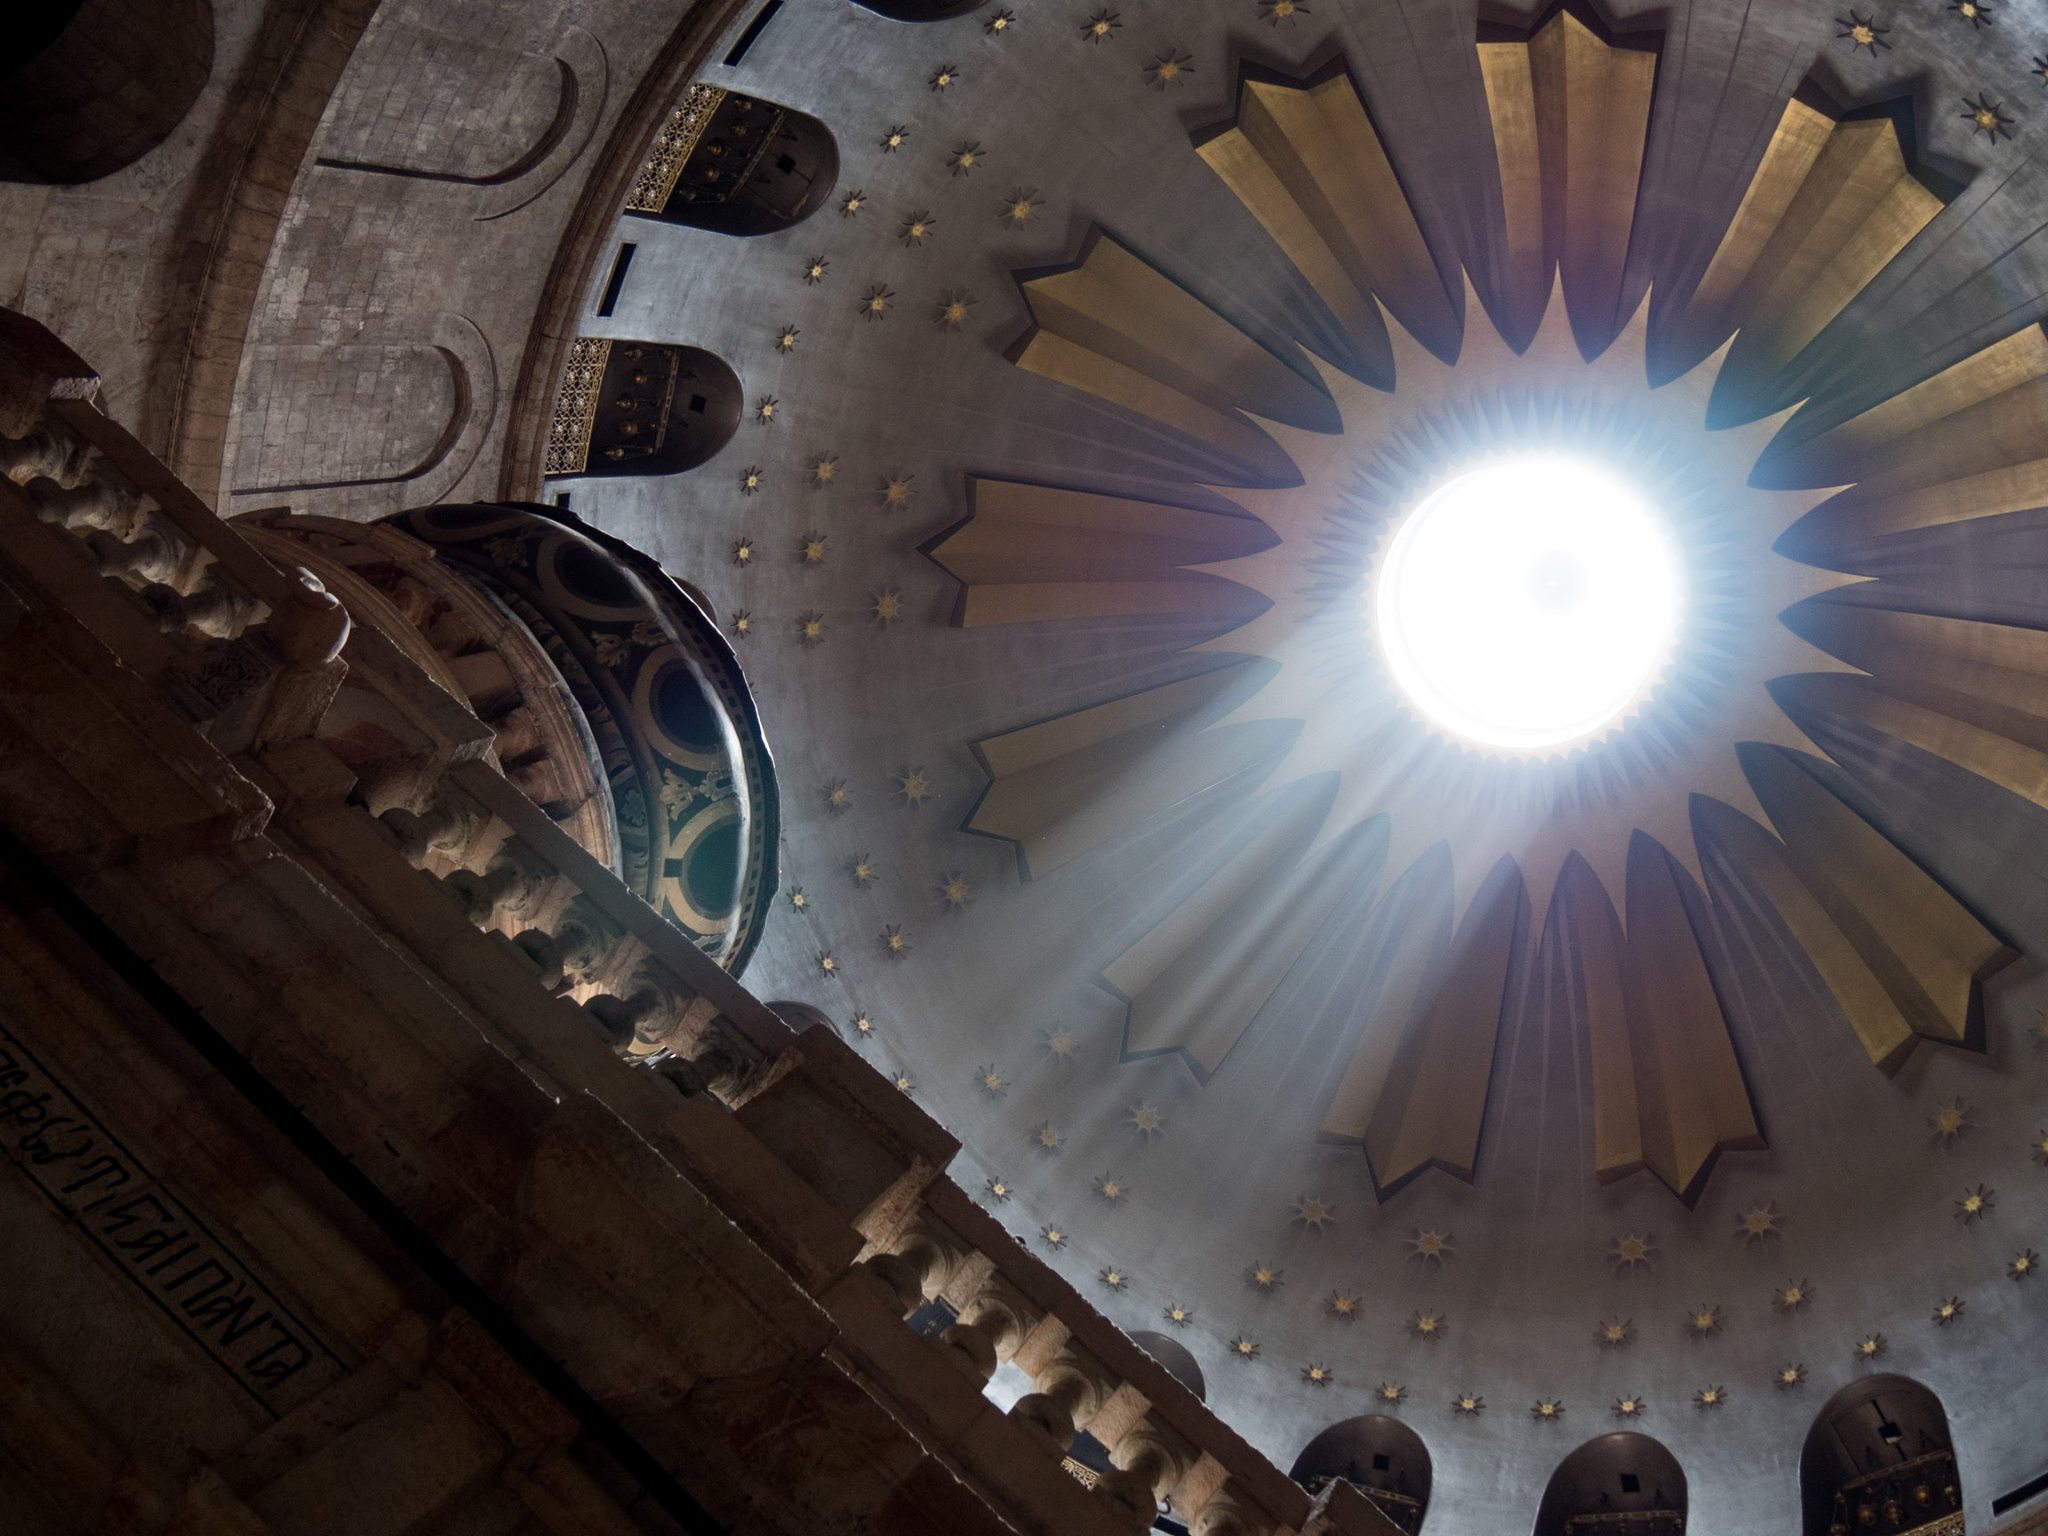 Oculus in the dome of the Church of the Holy Sepulchre, Jerusalem